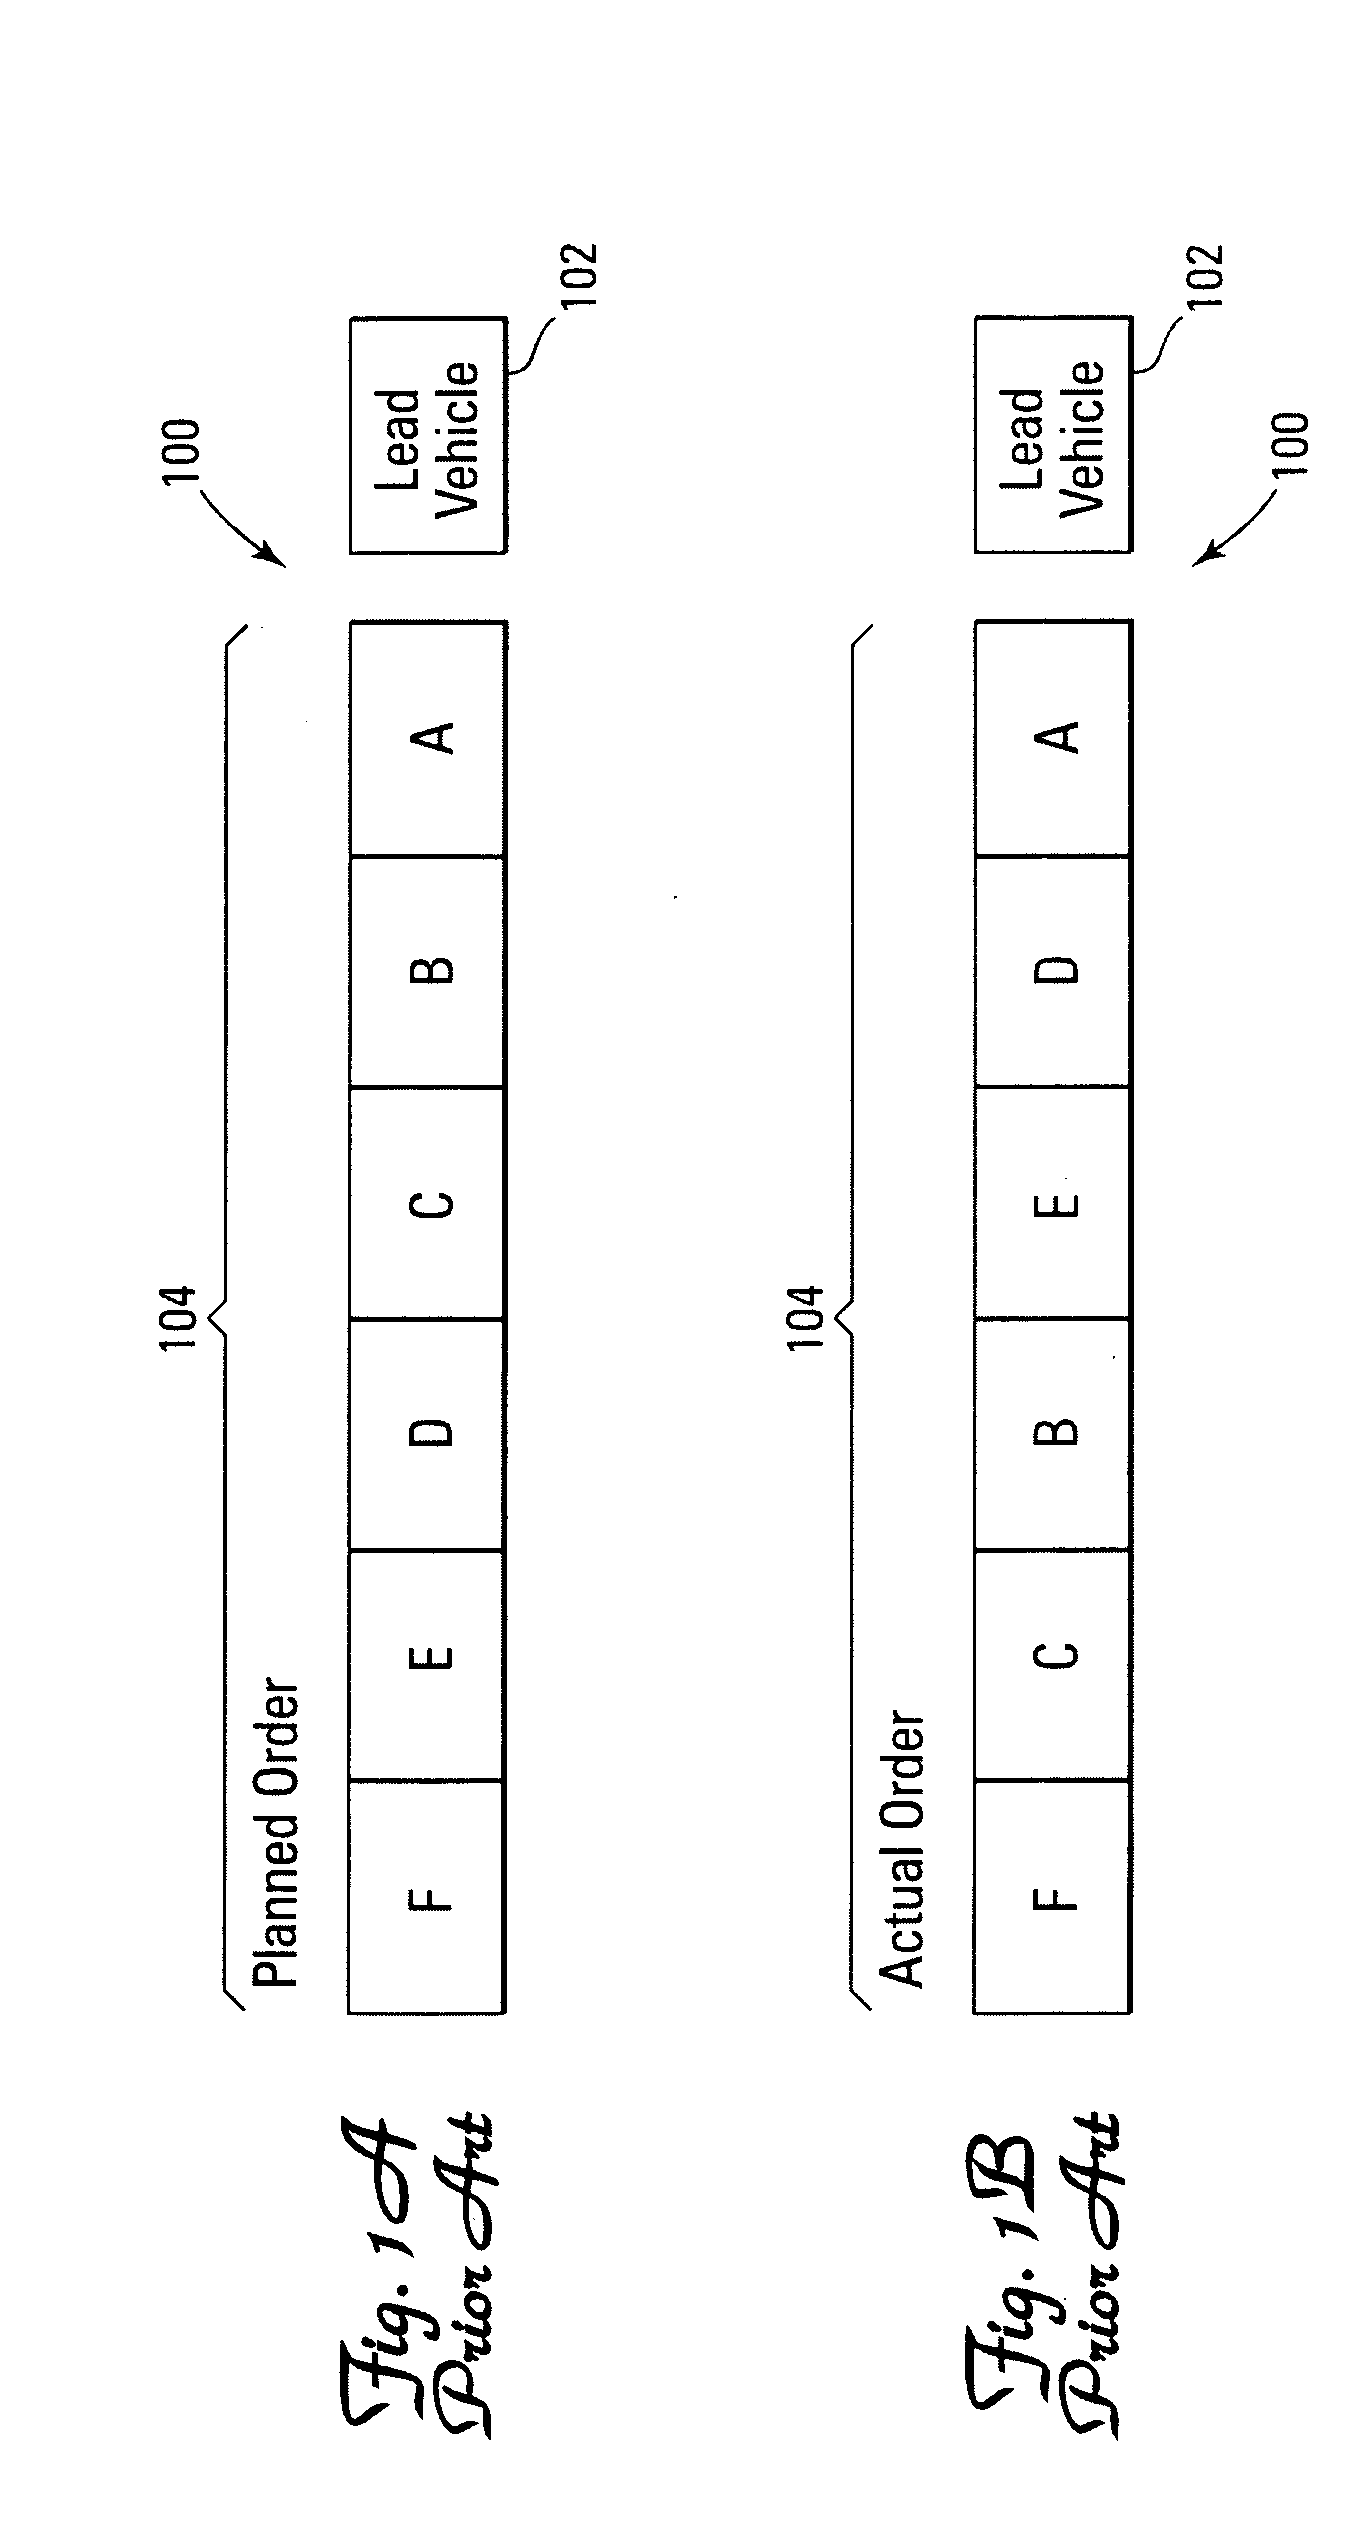 Automatic sequencing based on wireless connectivity